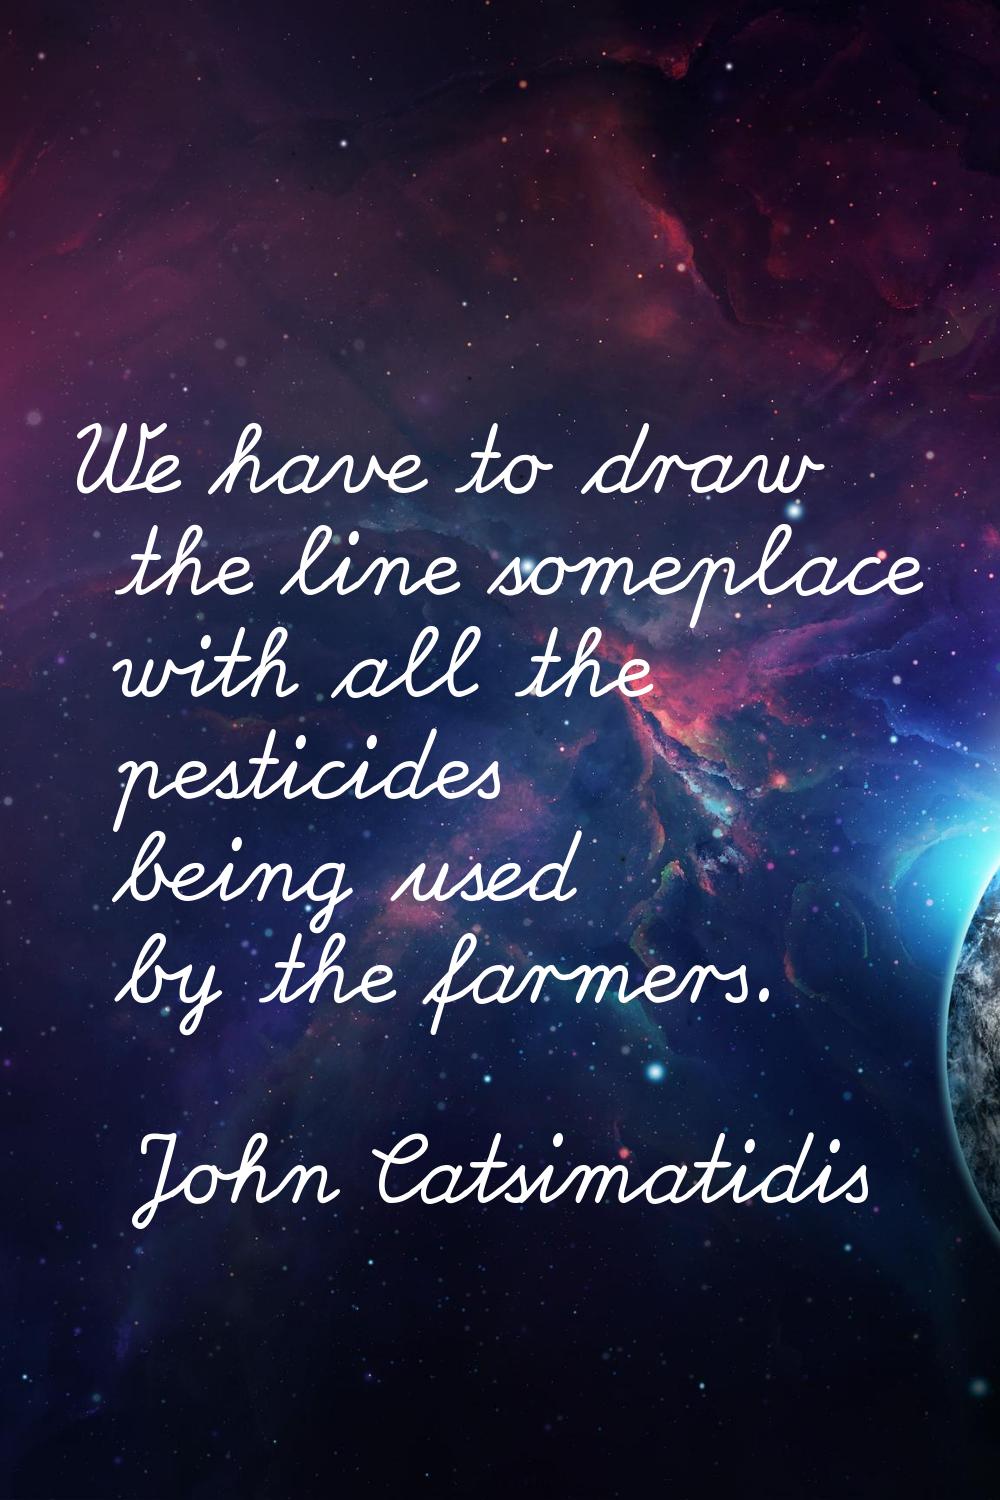 We have to draw the line someplace with all the pesticides being used by the farmers.